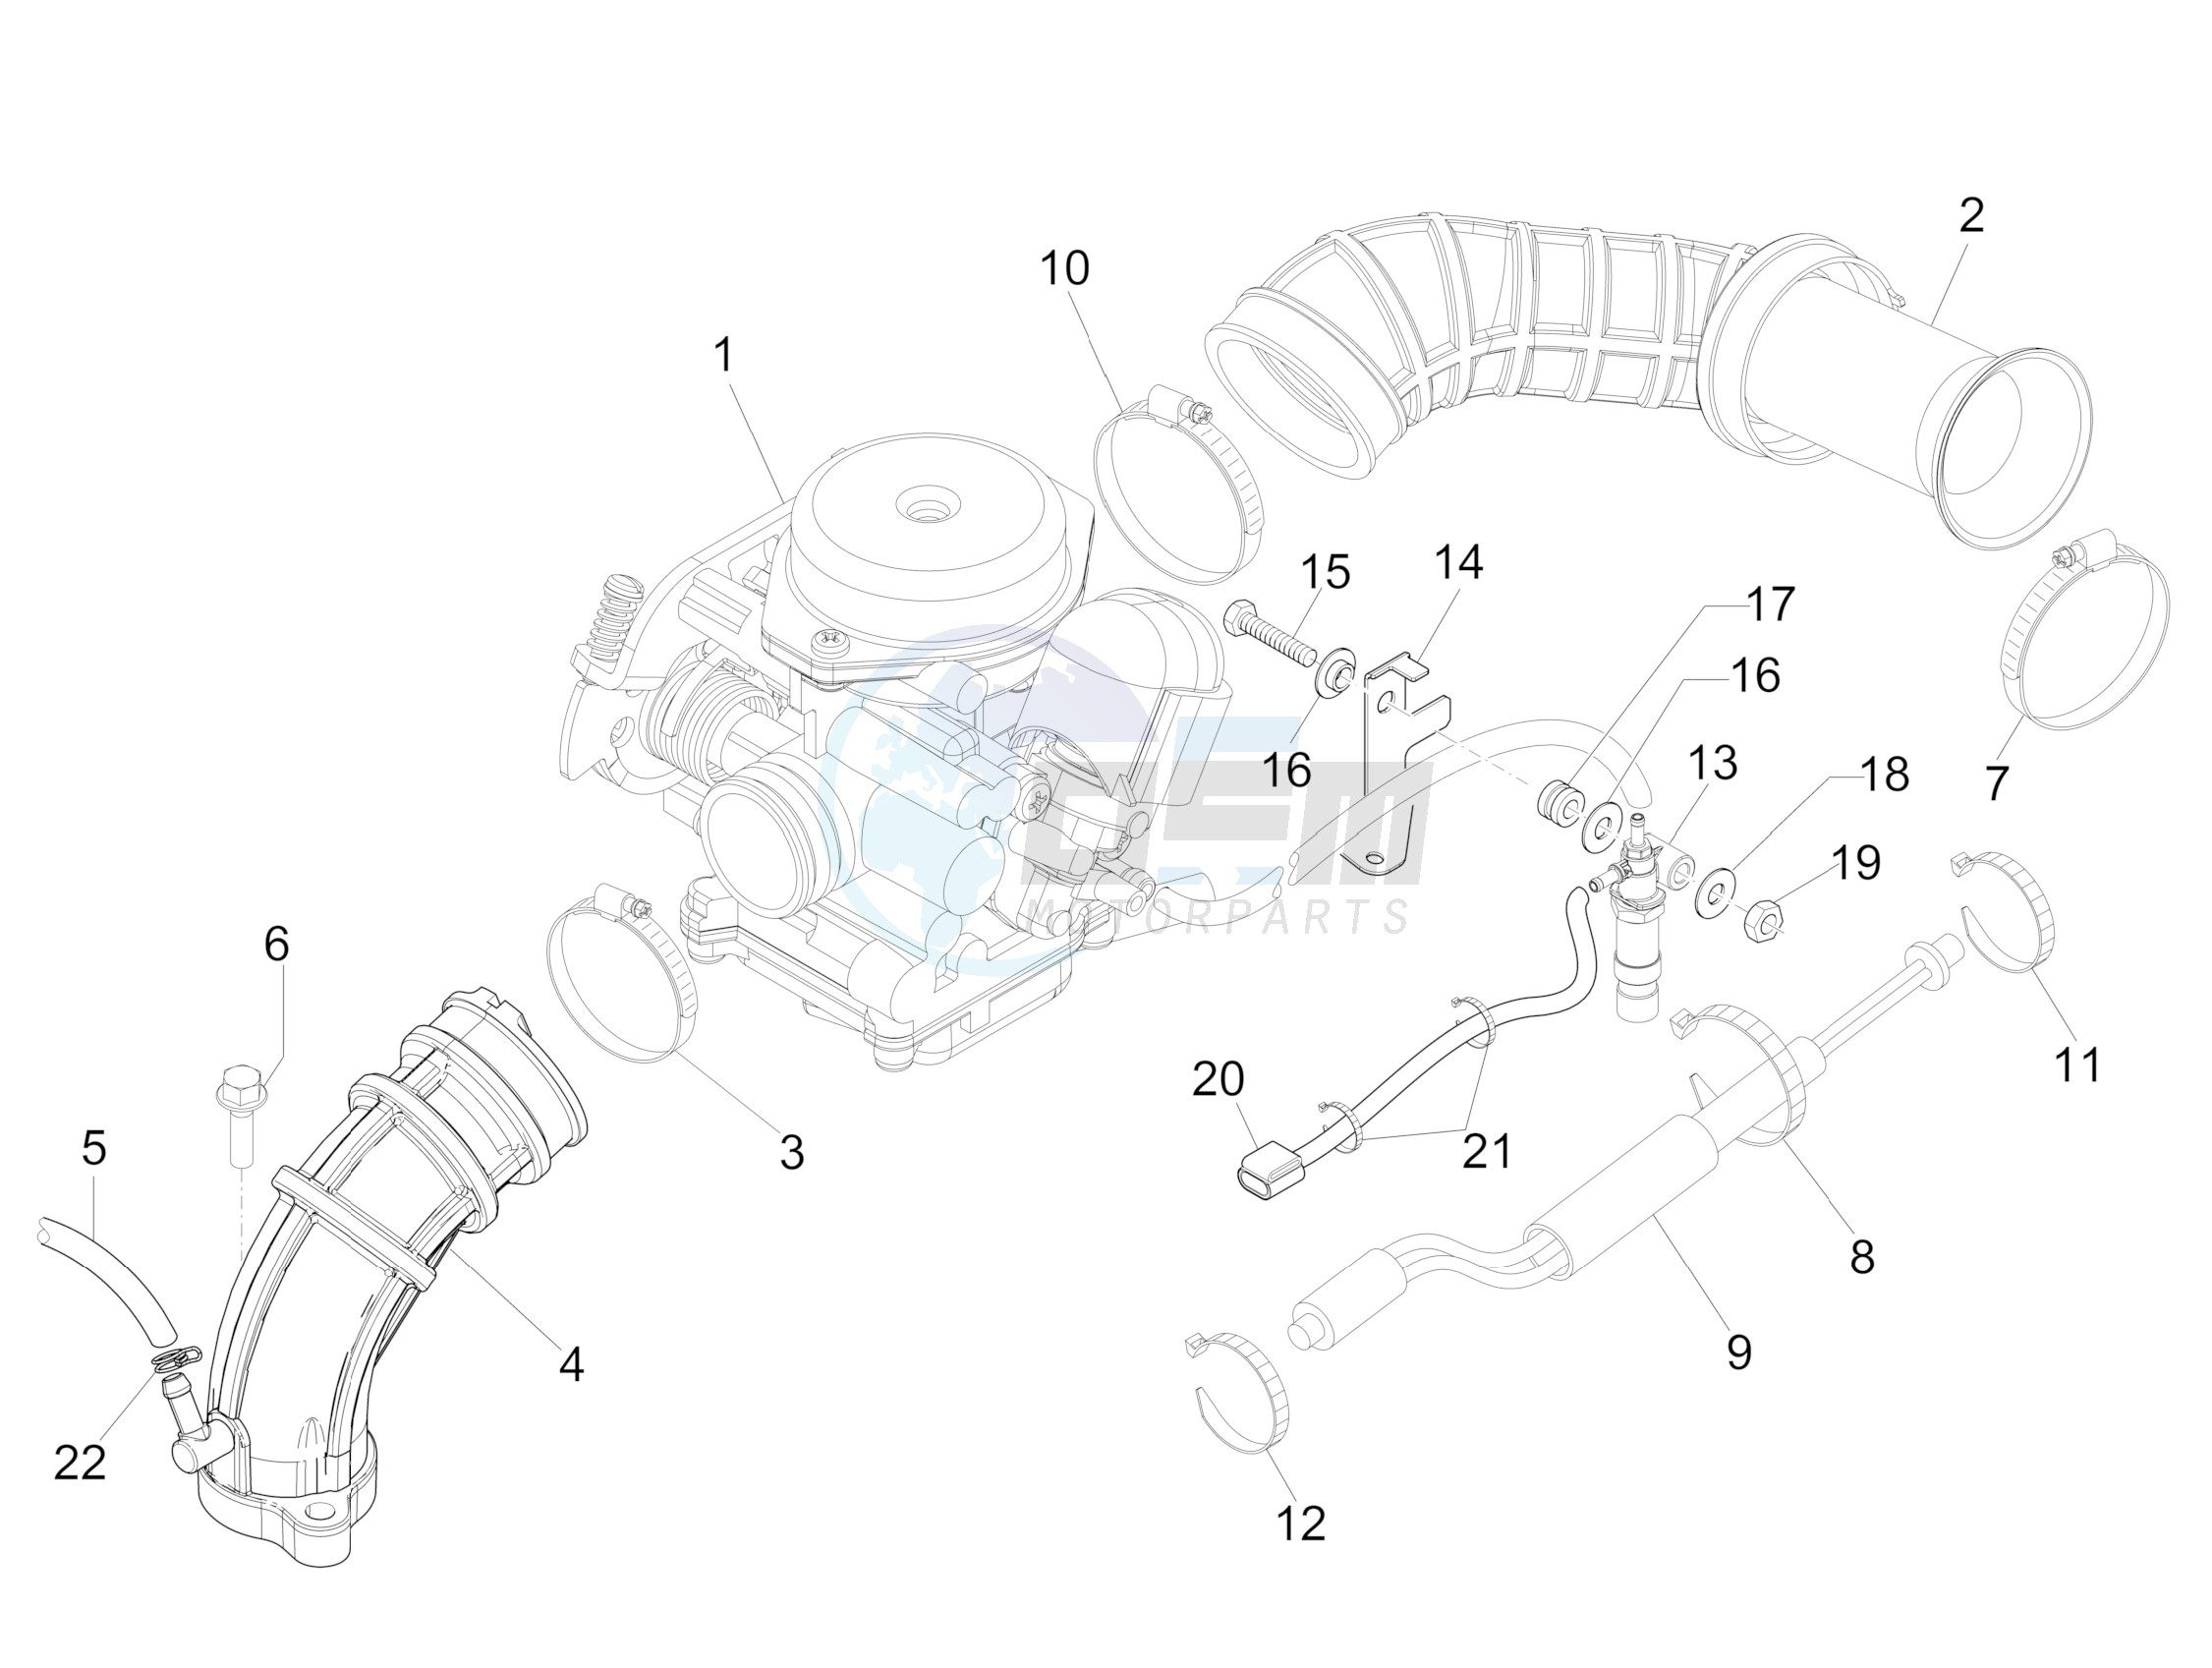 Carburettor, assembly - Union pipe image